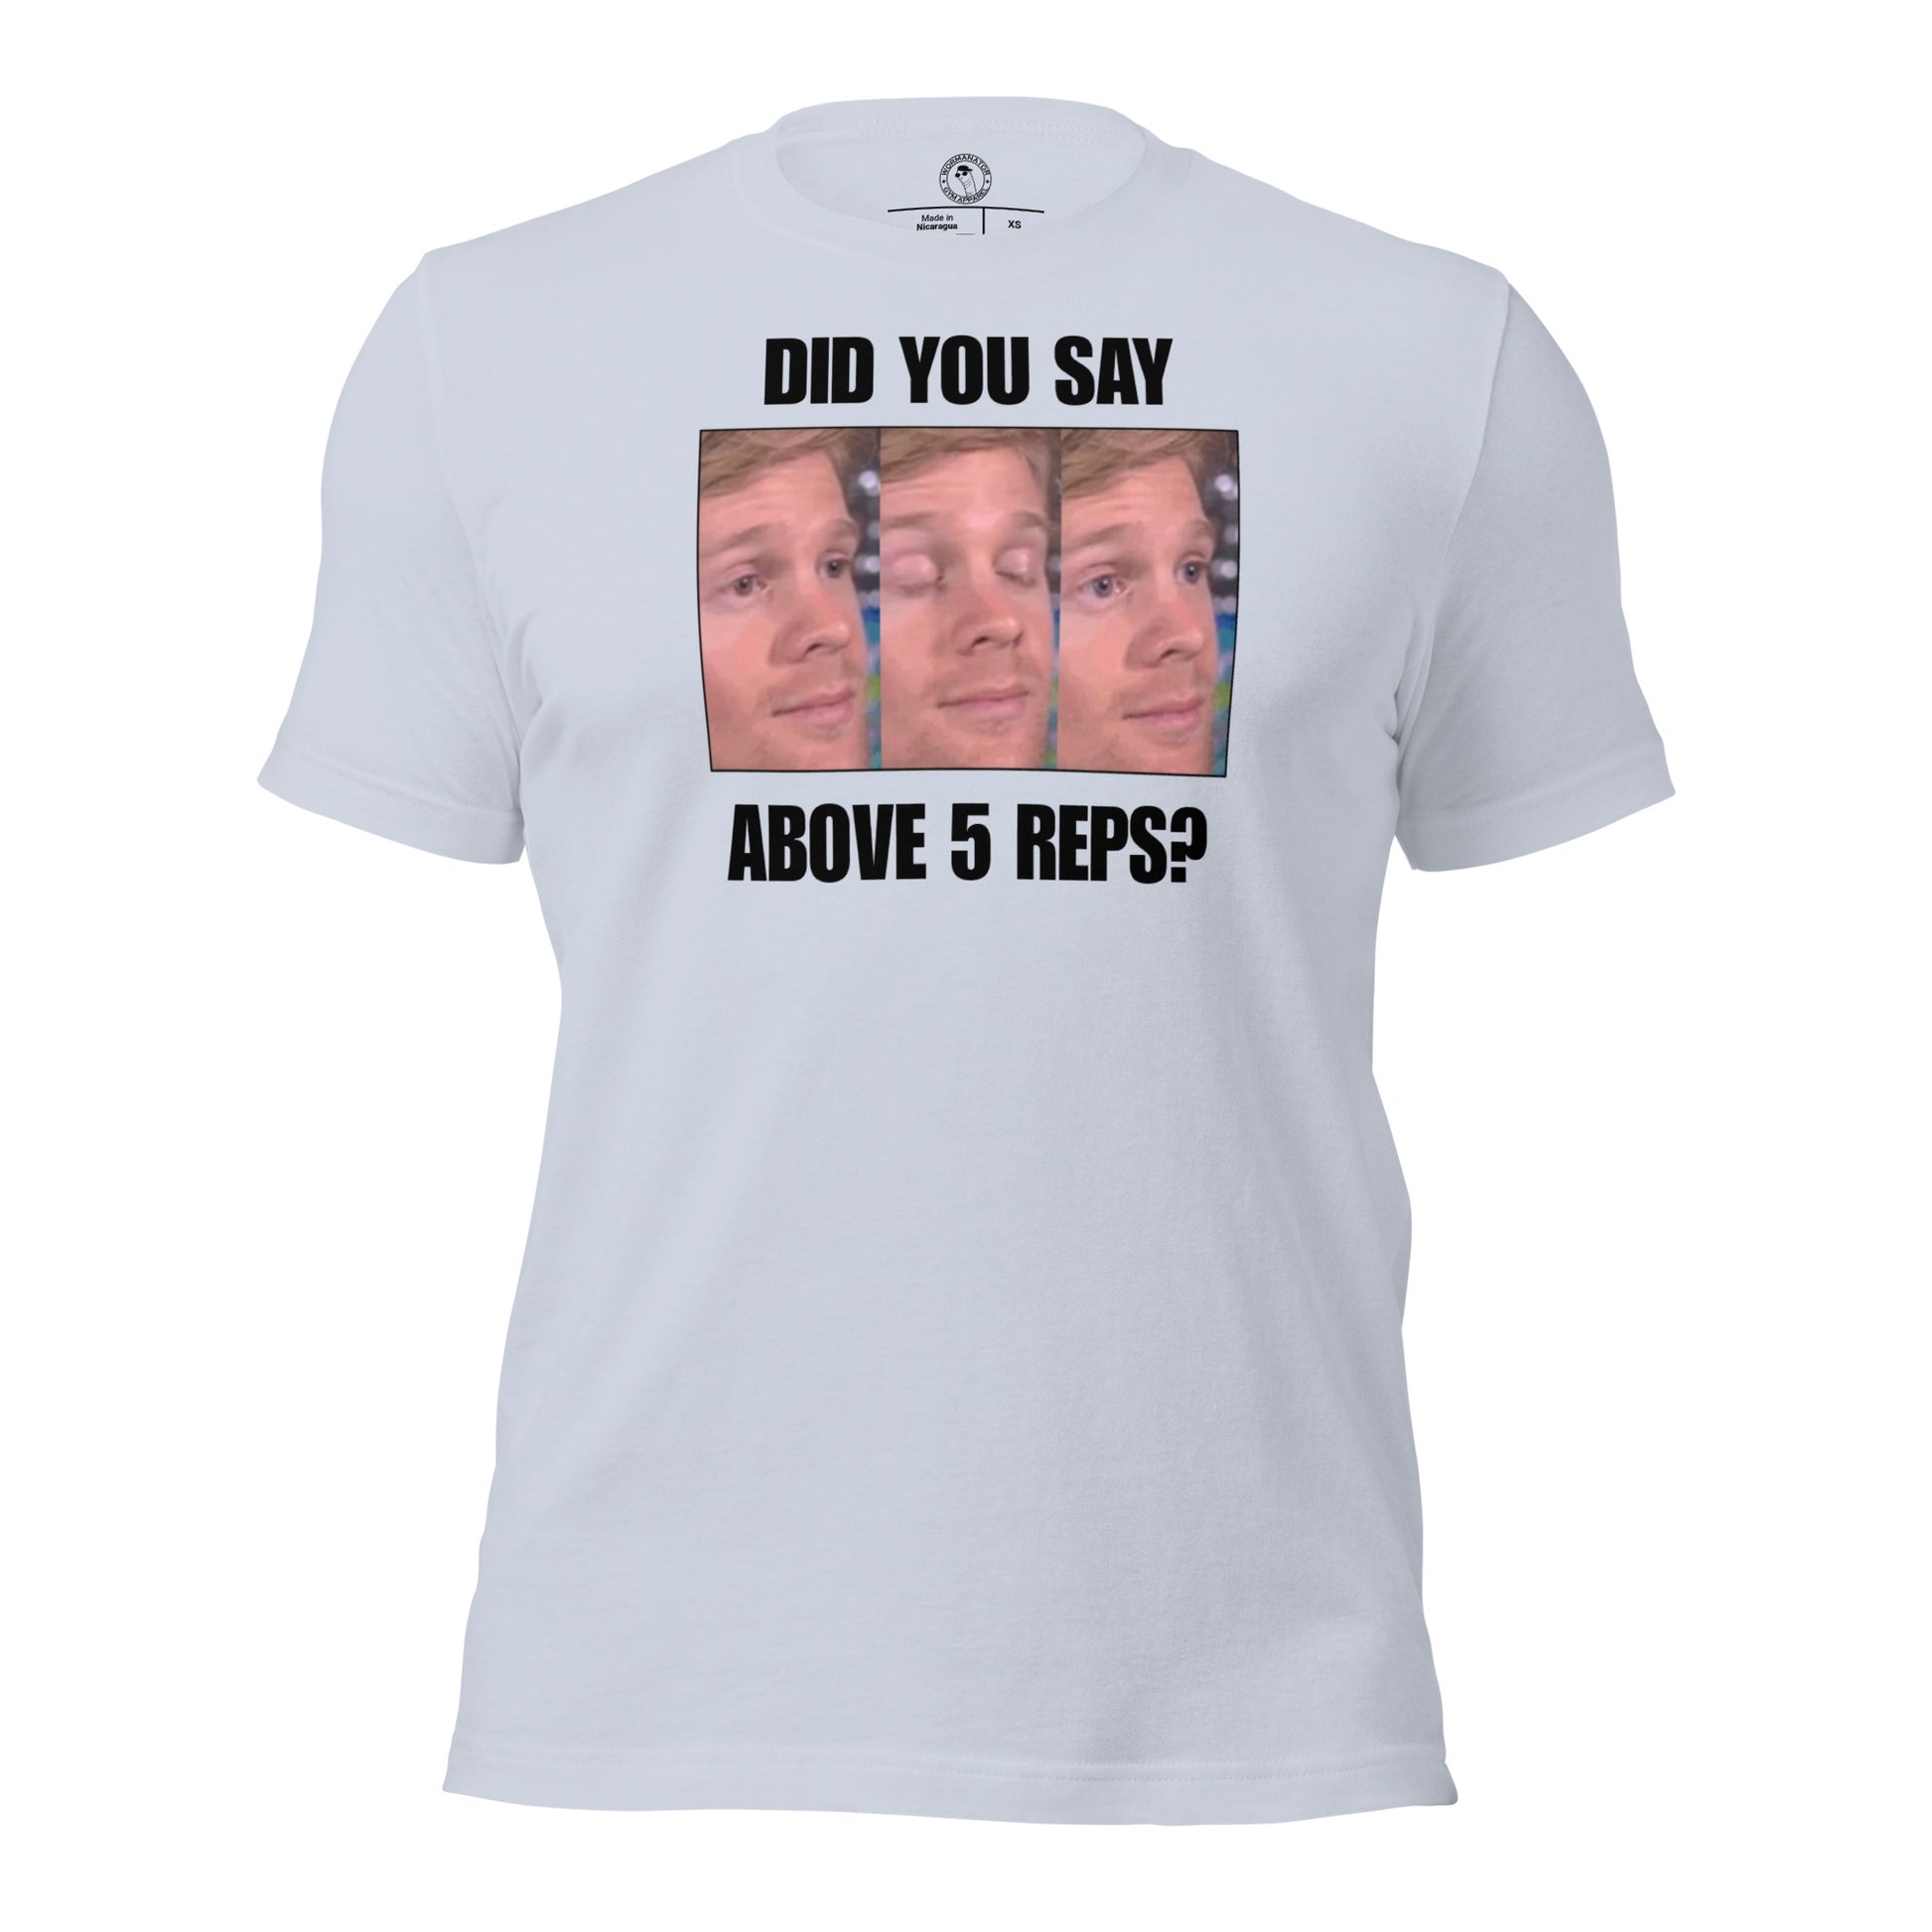 Above 5 Reps is Cardio Shirt in Light Blue